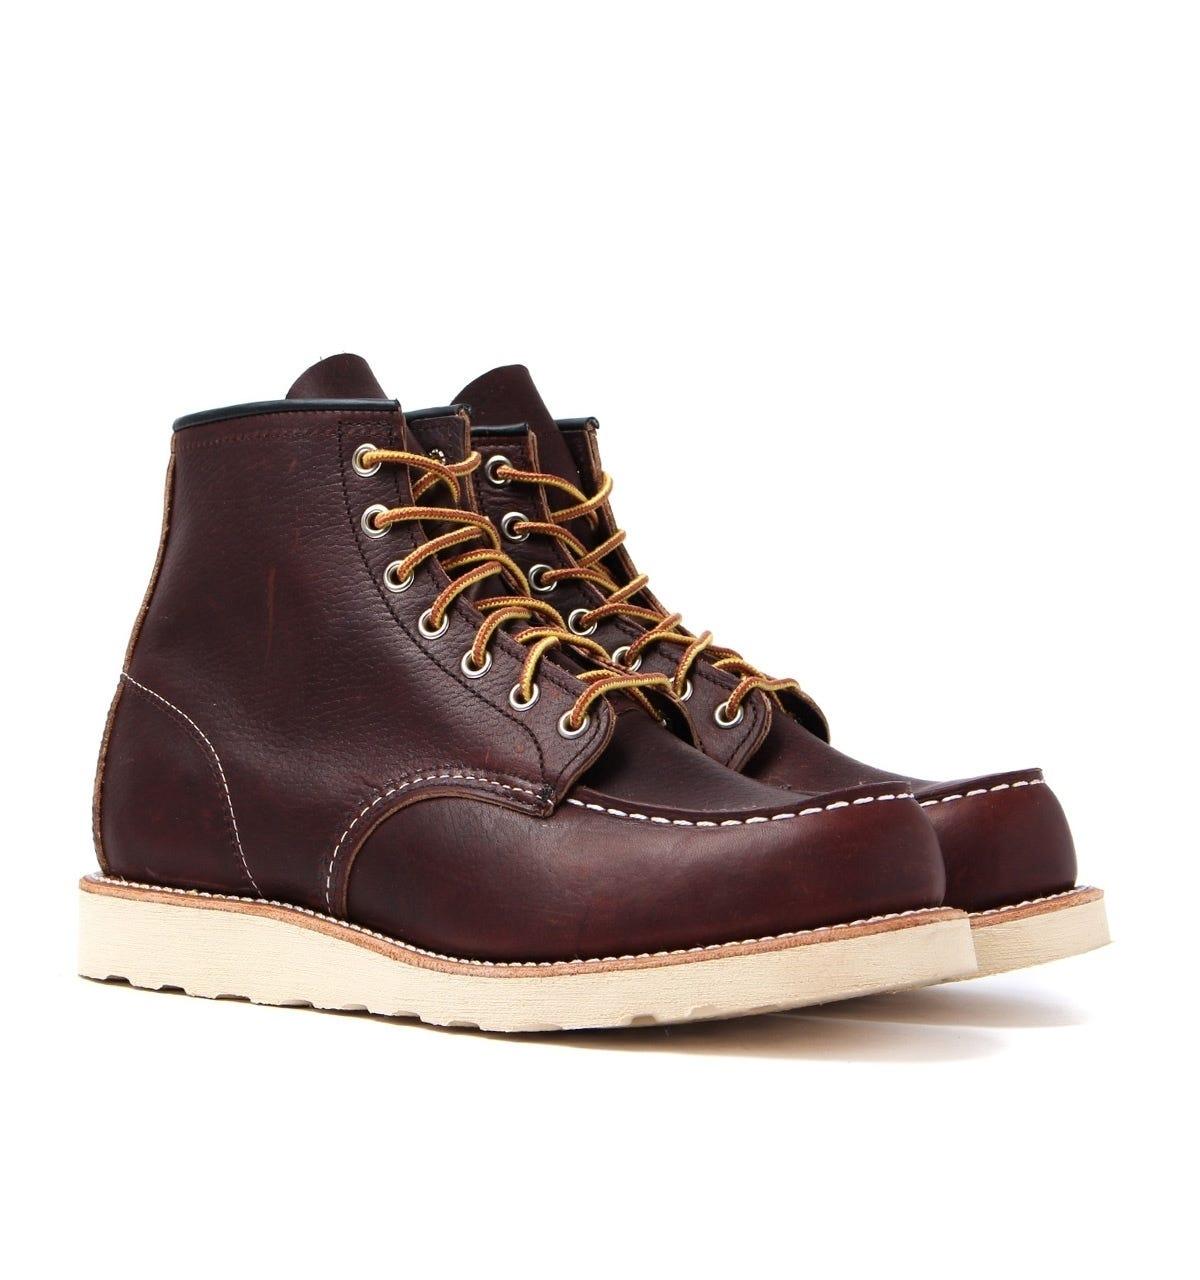 Red Wing 8138 Classic Moc Toe Leather Boots - Briar Oil Slick in Brown ...